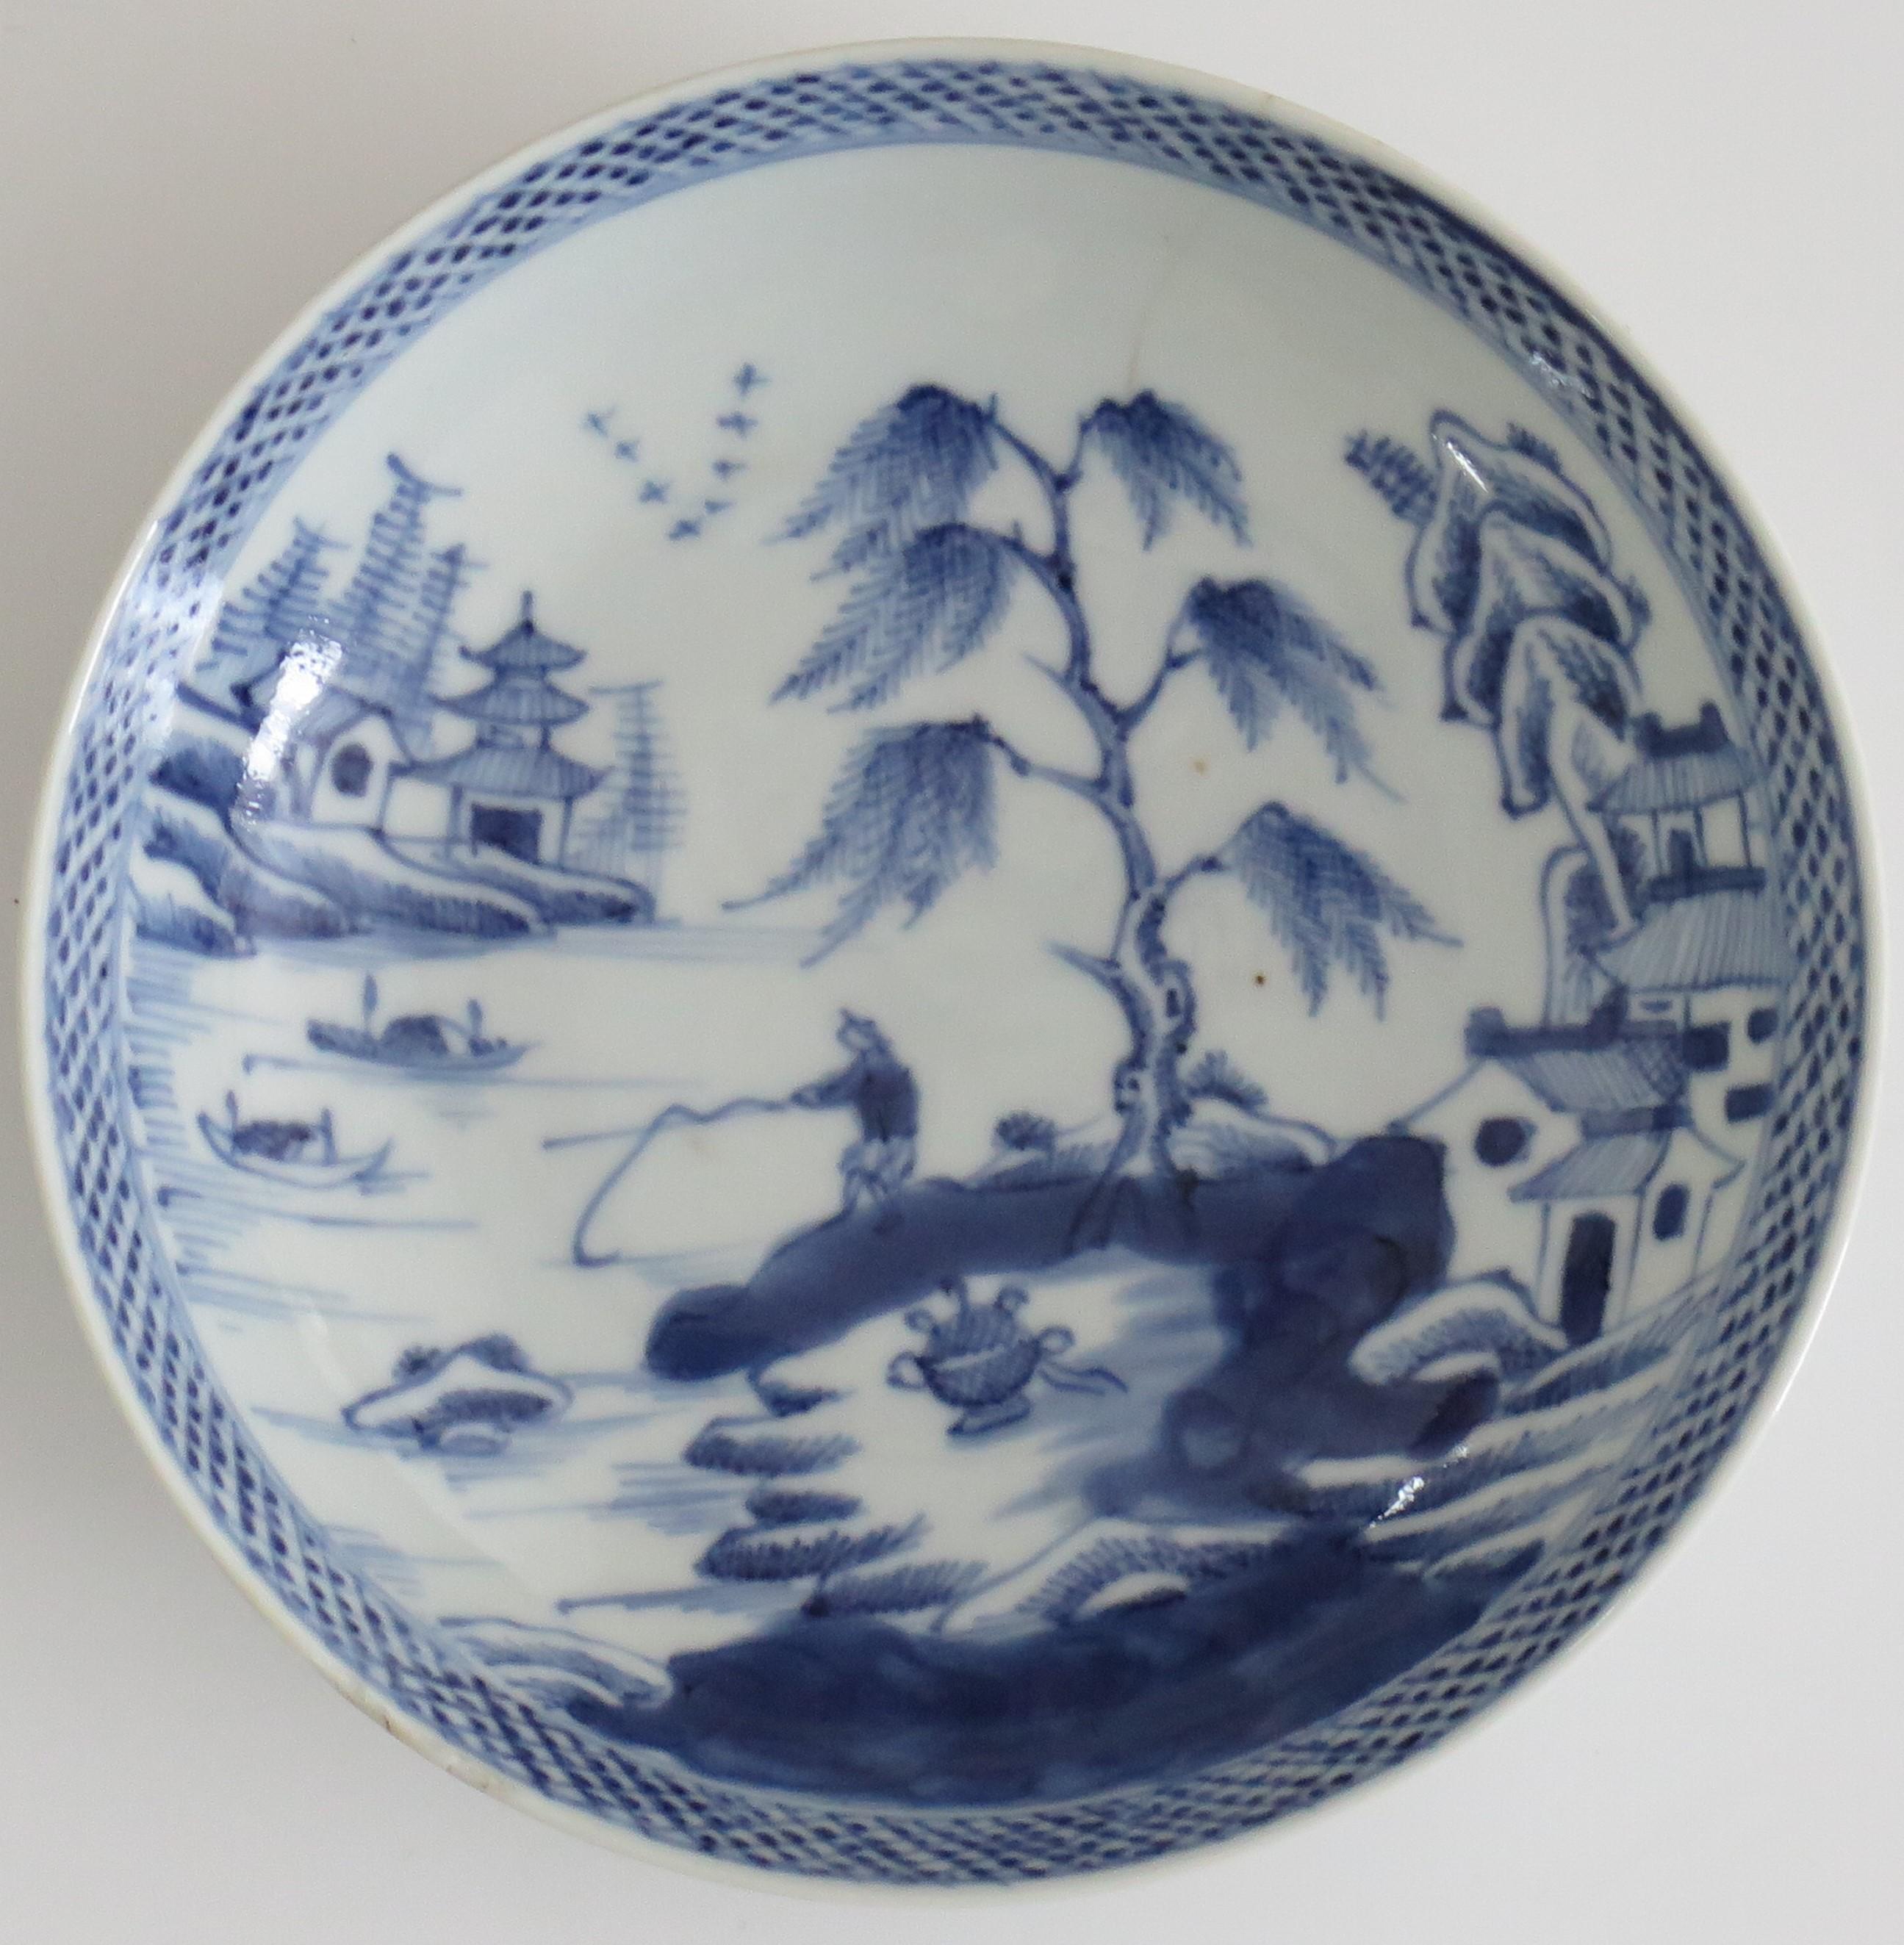 Glazed Chinese Export Porcelain Small Berry Bowl or Dish Blue & White, Late 18th C Qing